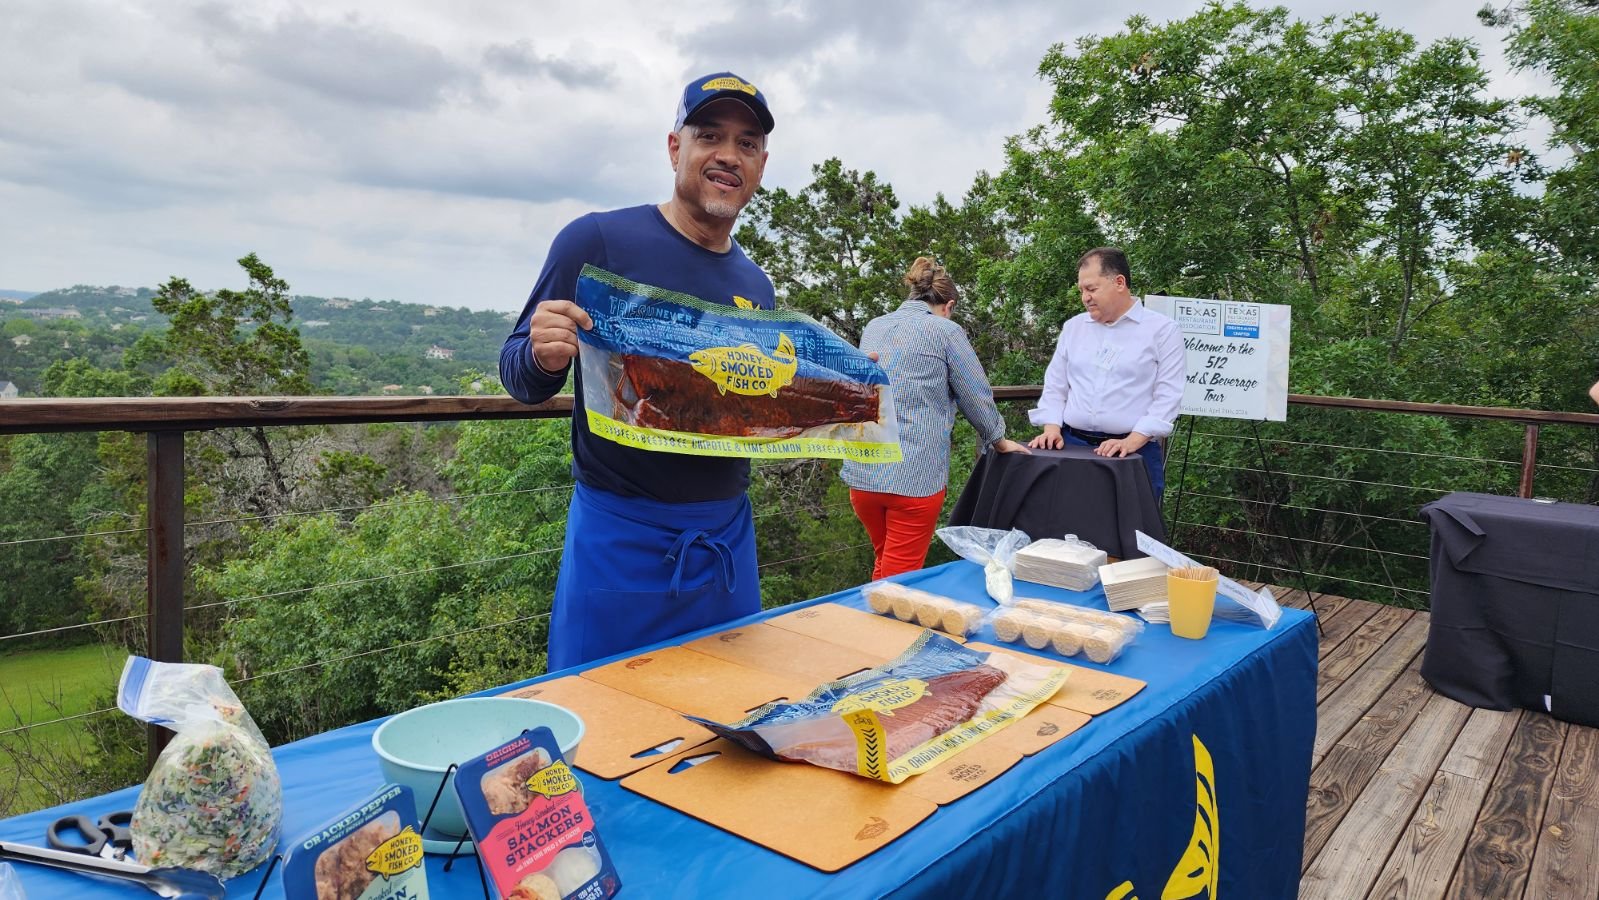 Hanging out in the beautiful Austin, Texas this week with @honeysmokedfish and the @gatrafoodies at the 512 Food &amp; Beverage Tour!

 #chef #cheflife #texasrestaurantassociation #austin #austintx #austinfoodie